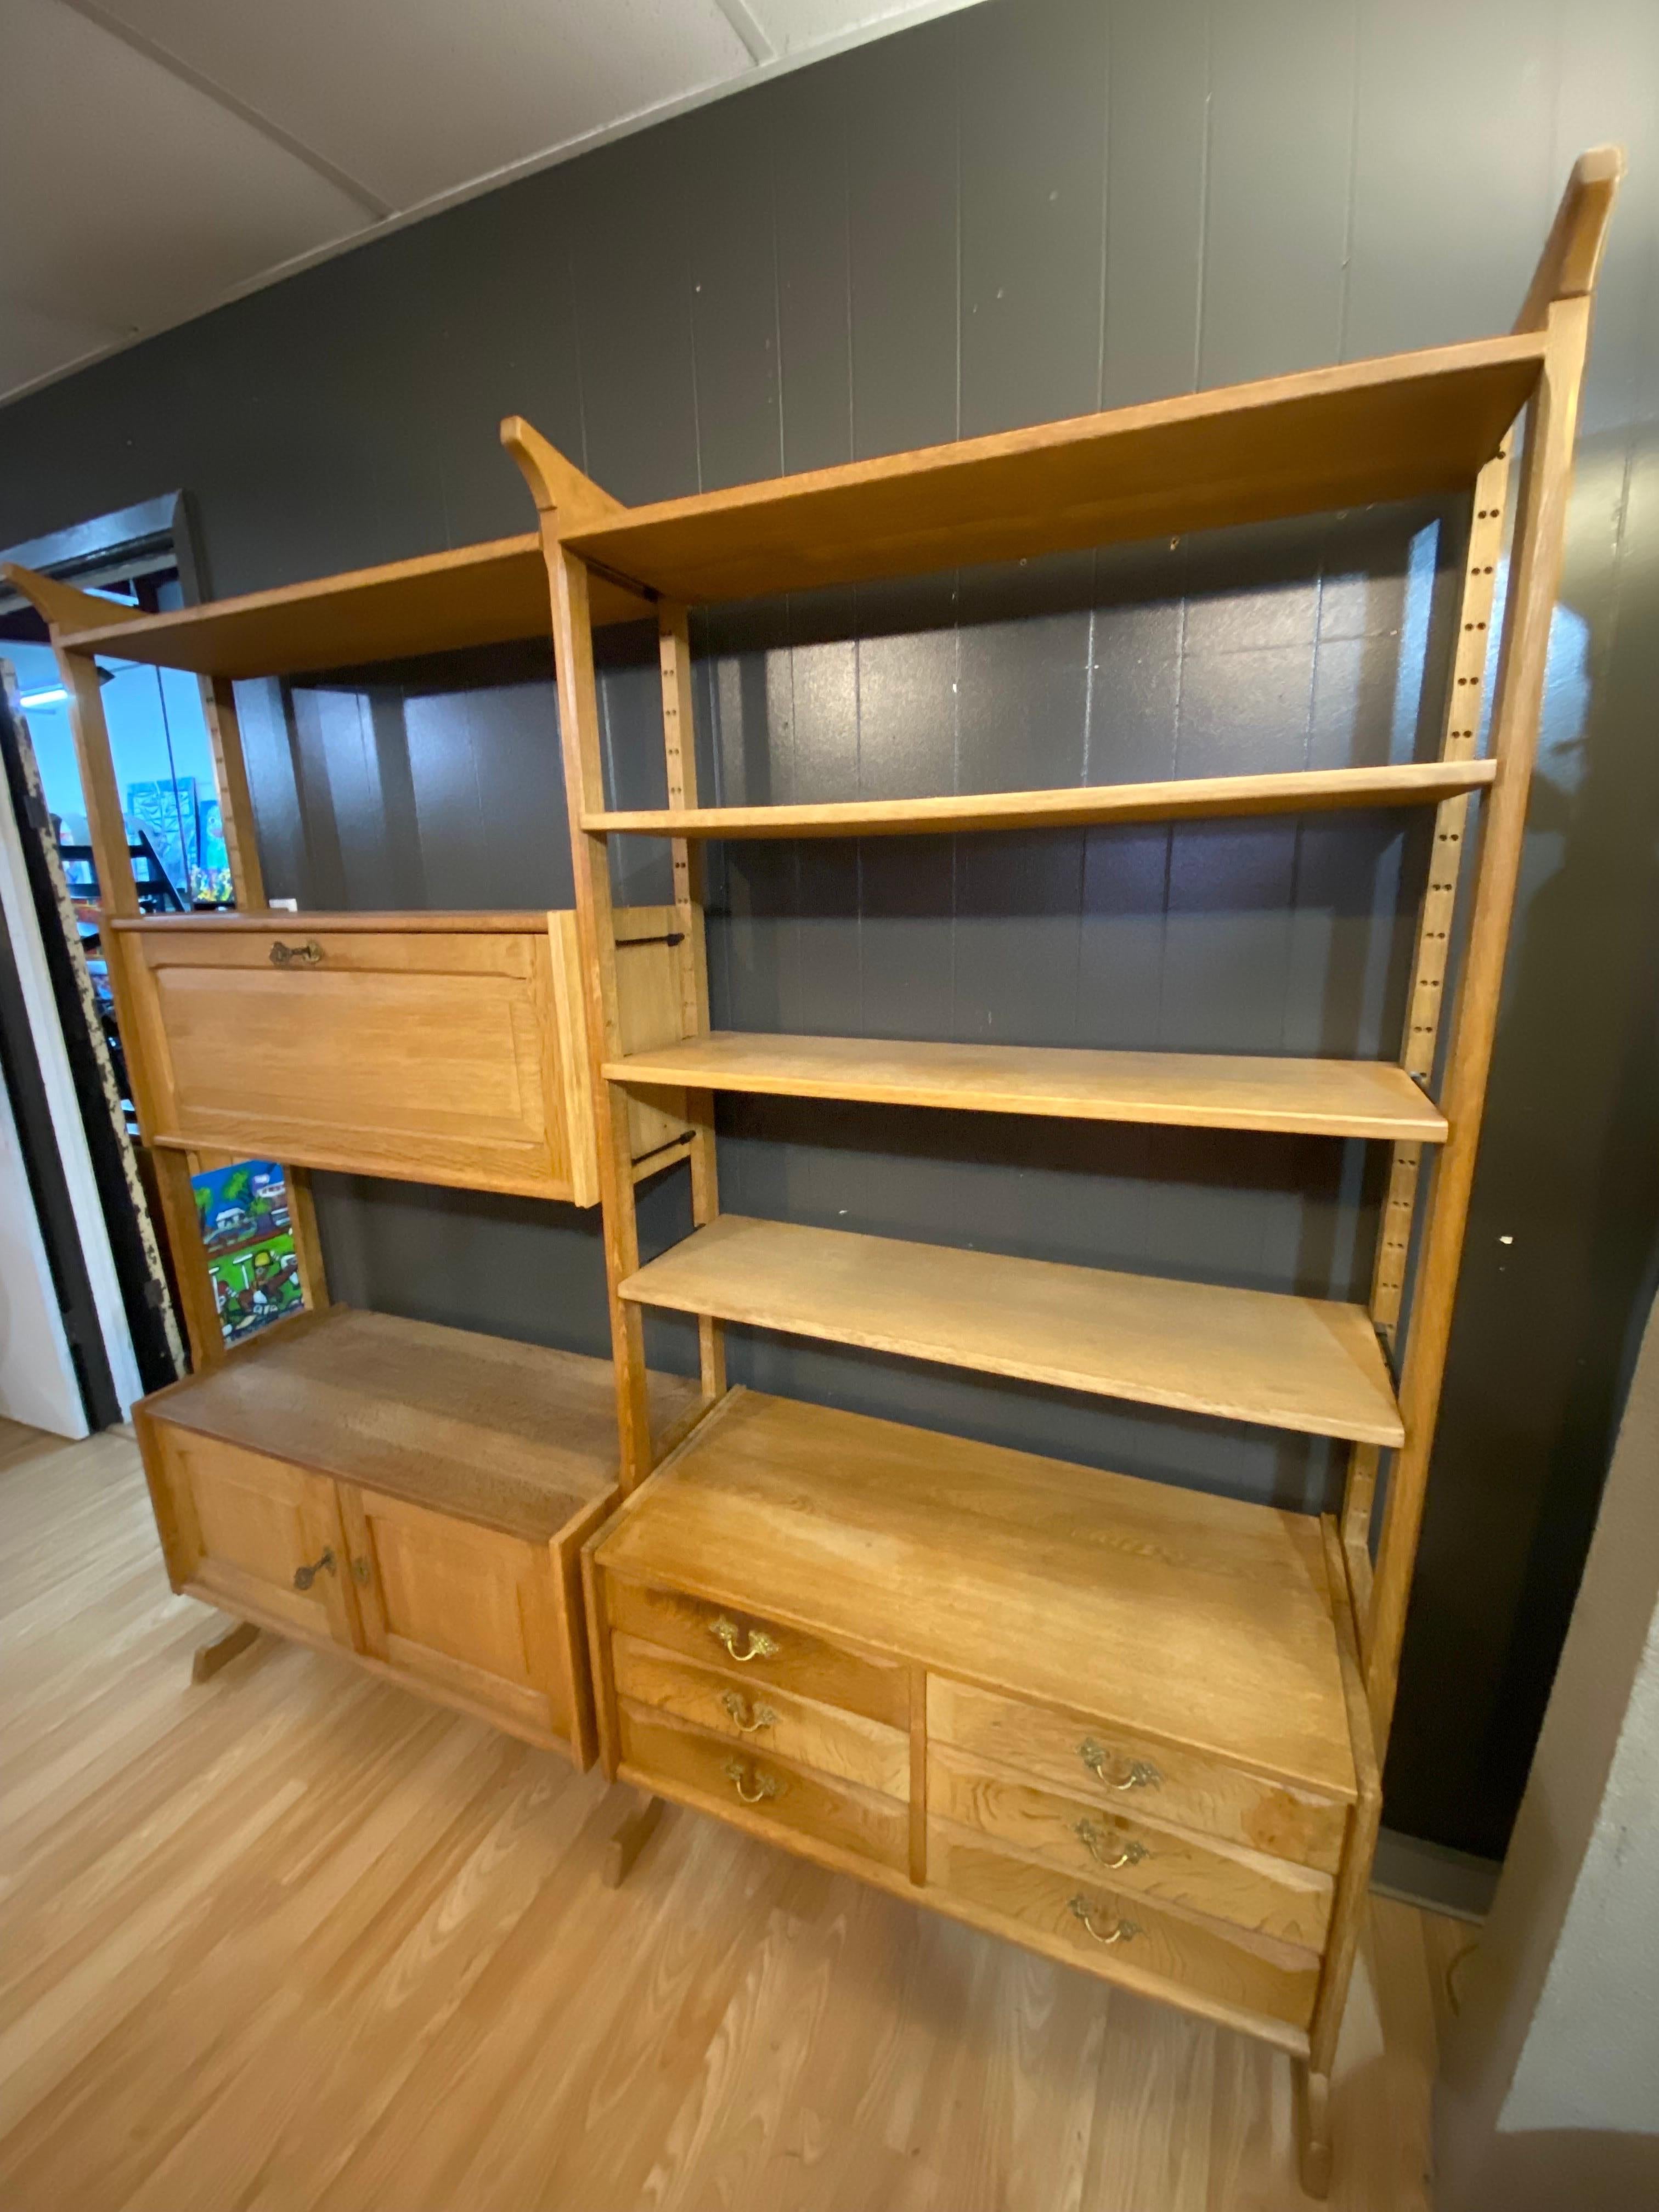 Beautifully detailed Danish modern brutalist solid oak shelving in the manner of Henning Kjærnulf features hand-crafted details and plenty of storage. On the left side there is a top compartment has two shelves and one open compartment and the